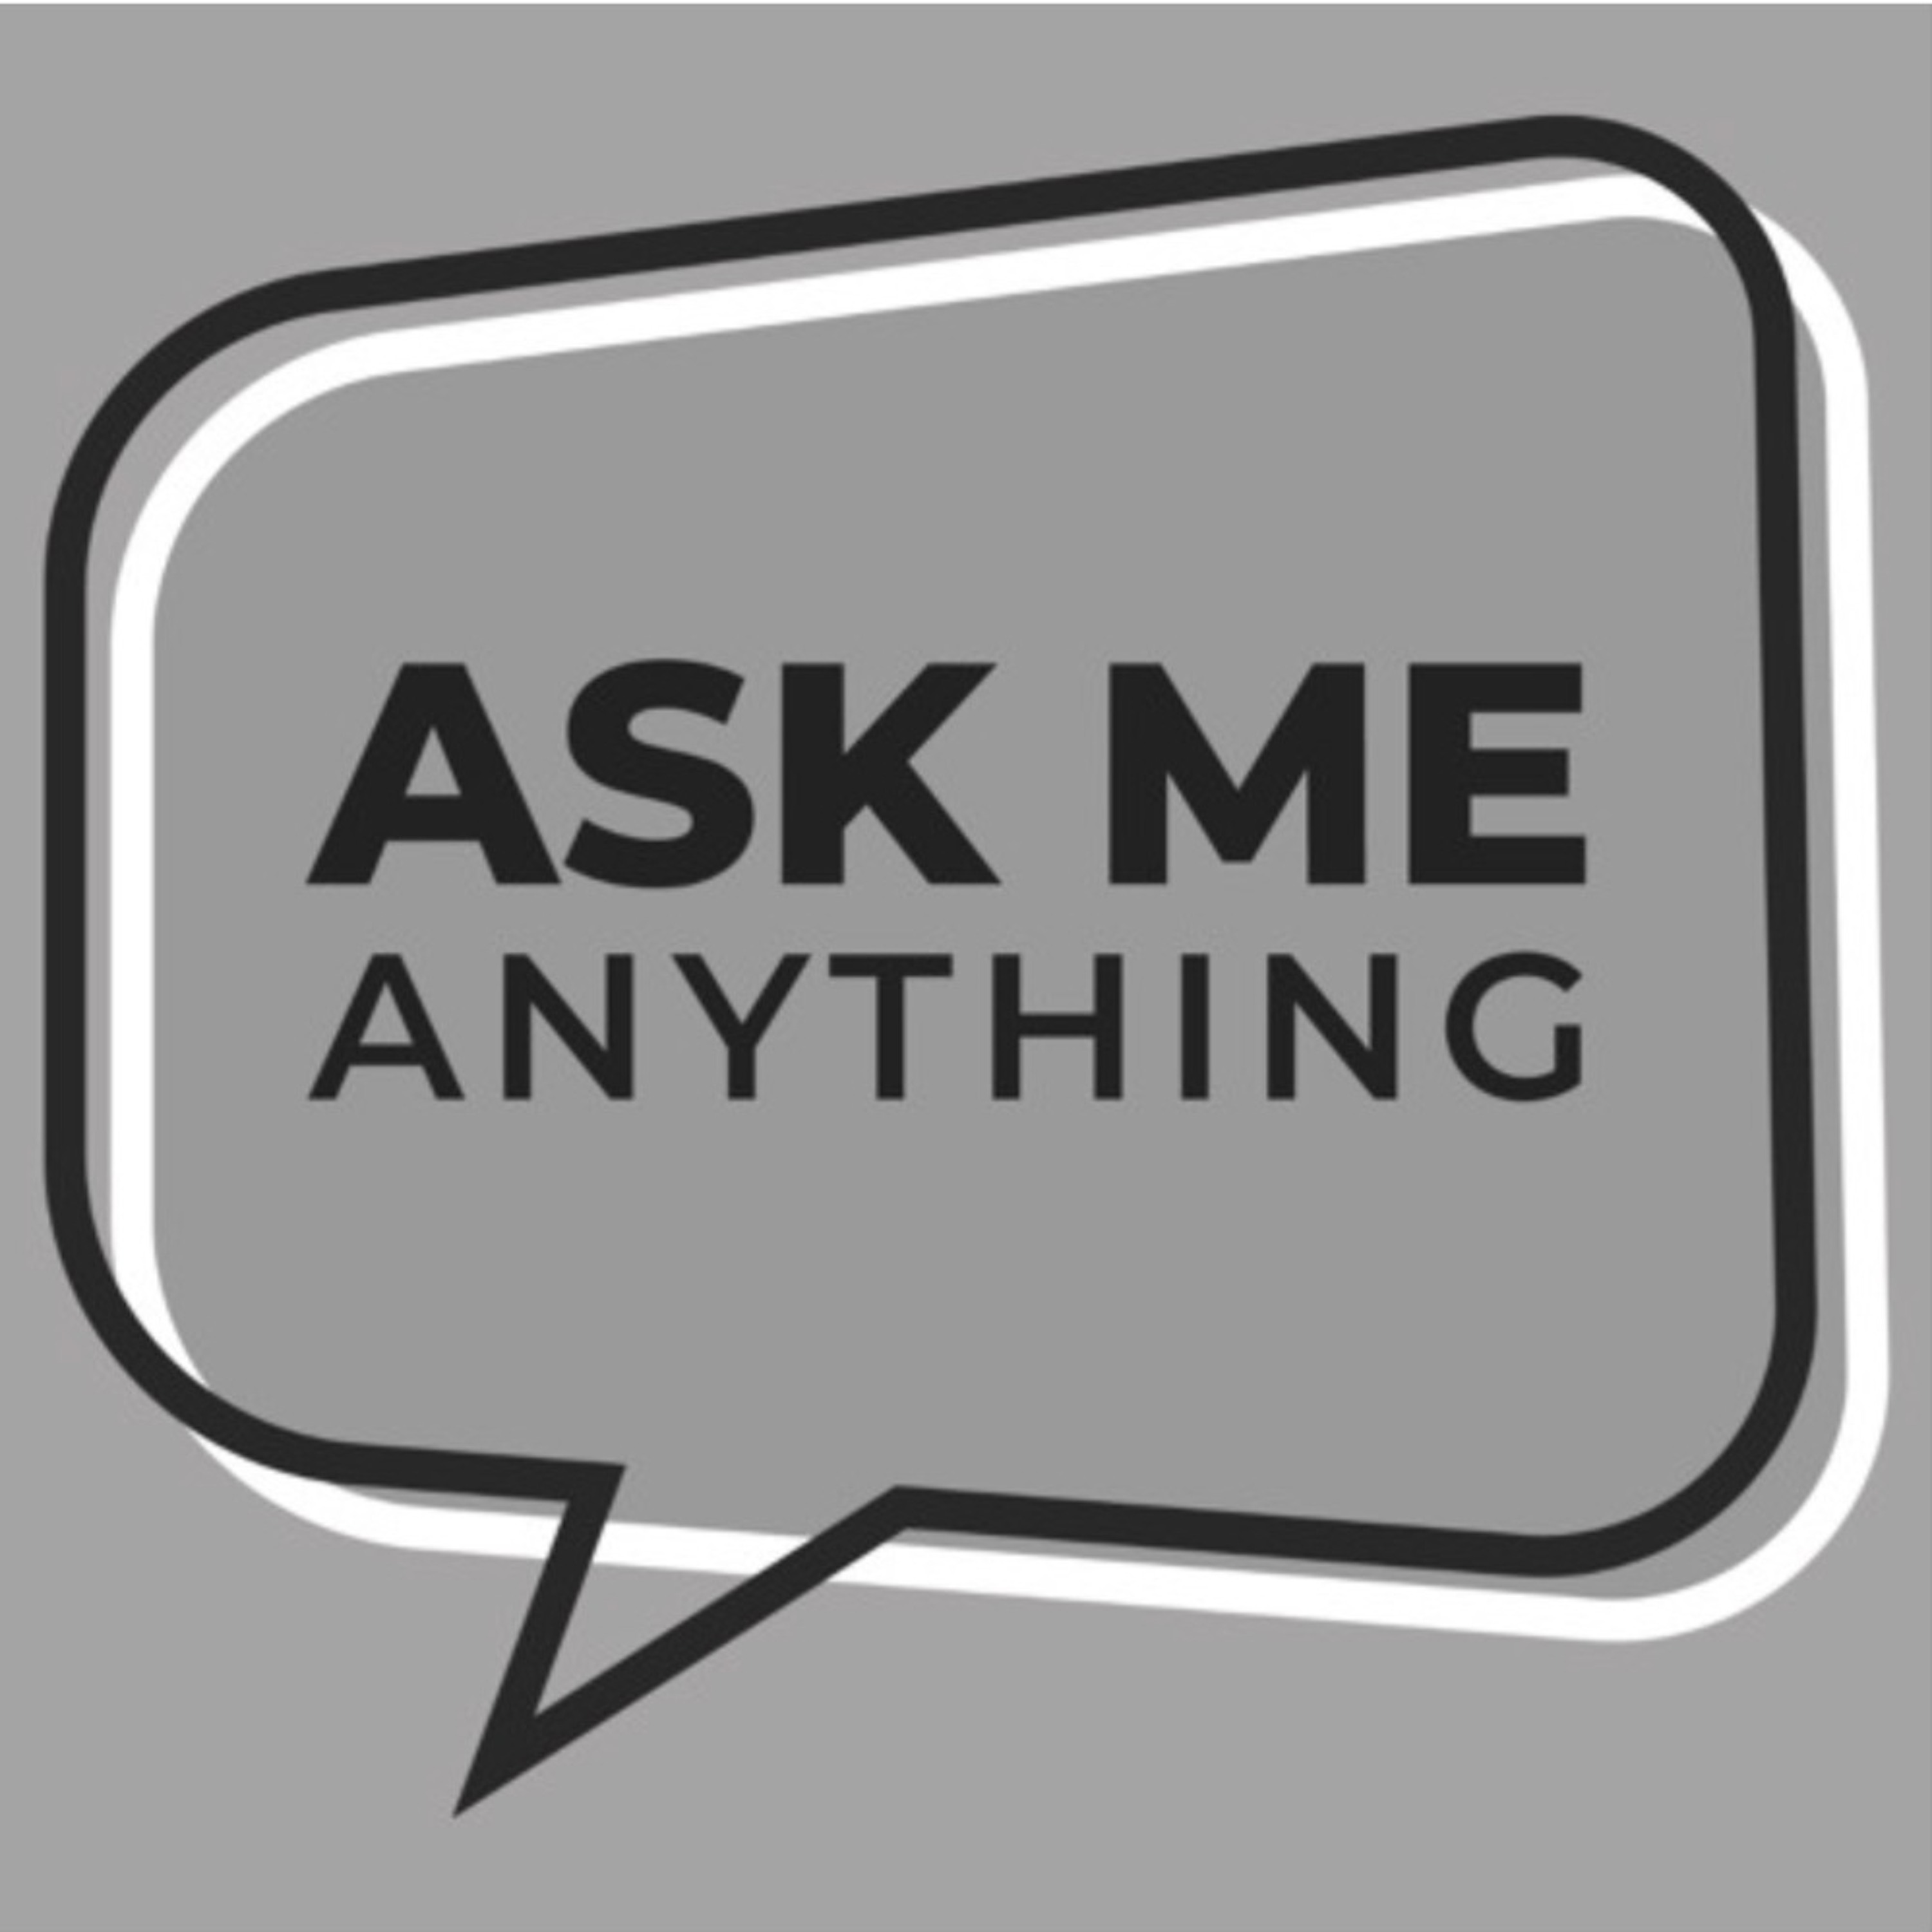 Ask Me Anything, Theresa Payton. Using The Wayback Machine In Investigations. Sponsored By Pipl.